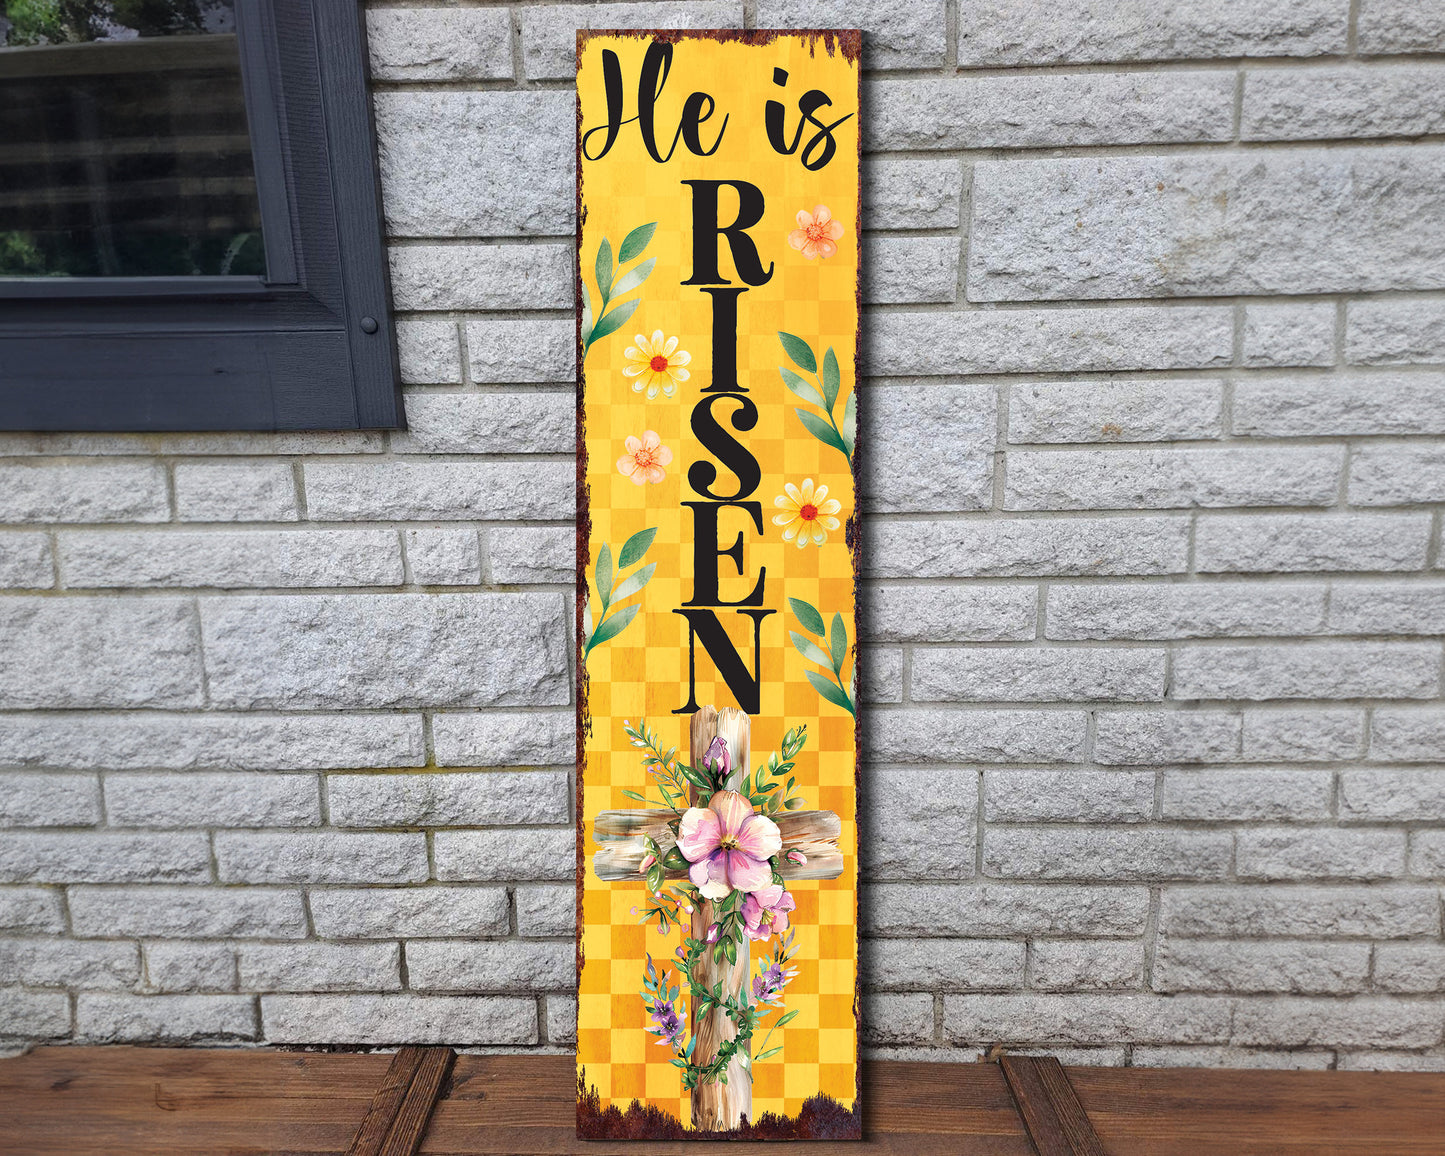 36in "He is Risen" Easter Porch Sign, Front Porch Easter Welcome Sign, Vintage Easter Decor, Modern Farmhouse Entryway Board for Outdoor